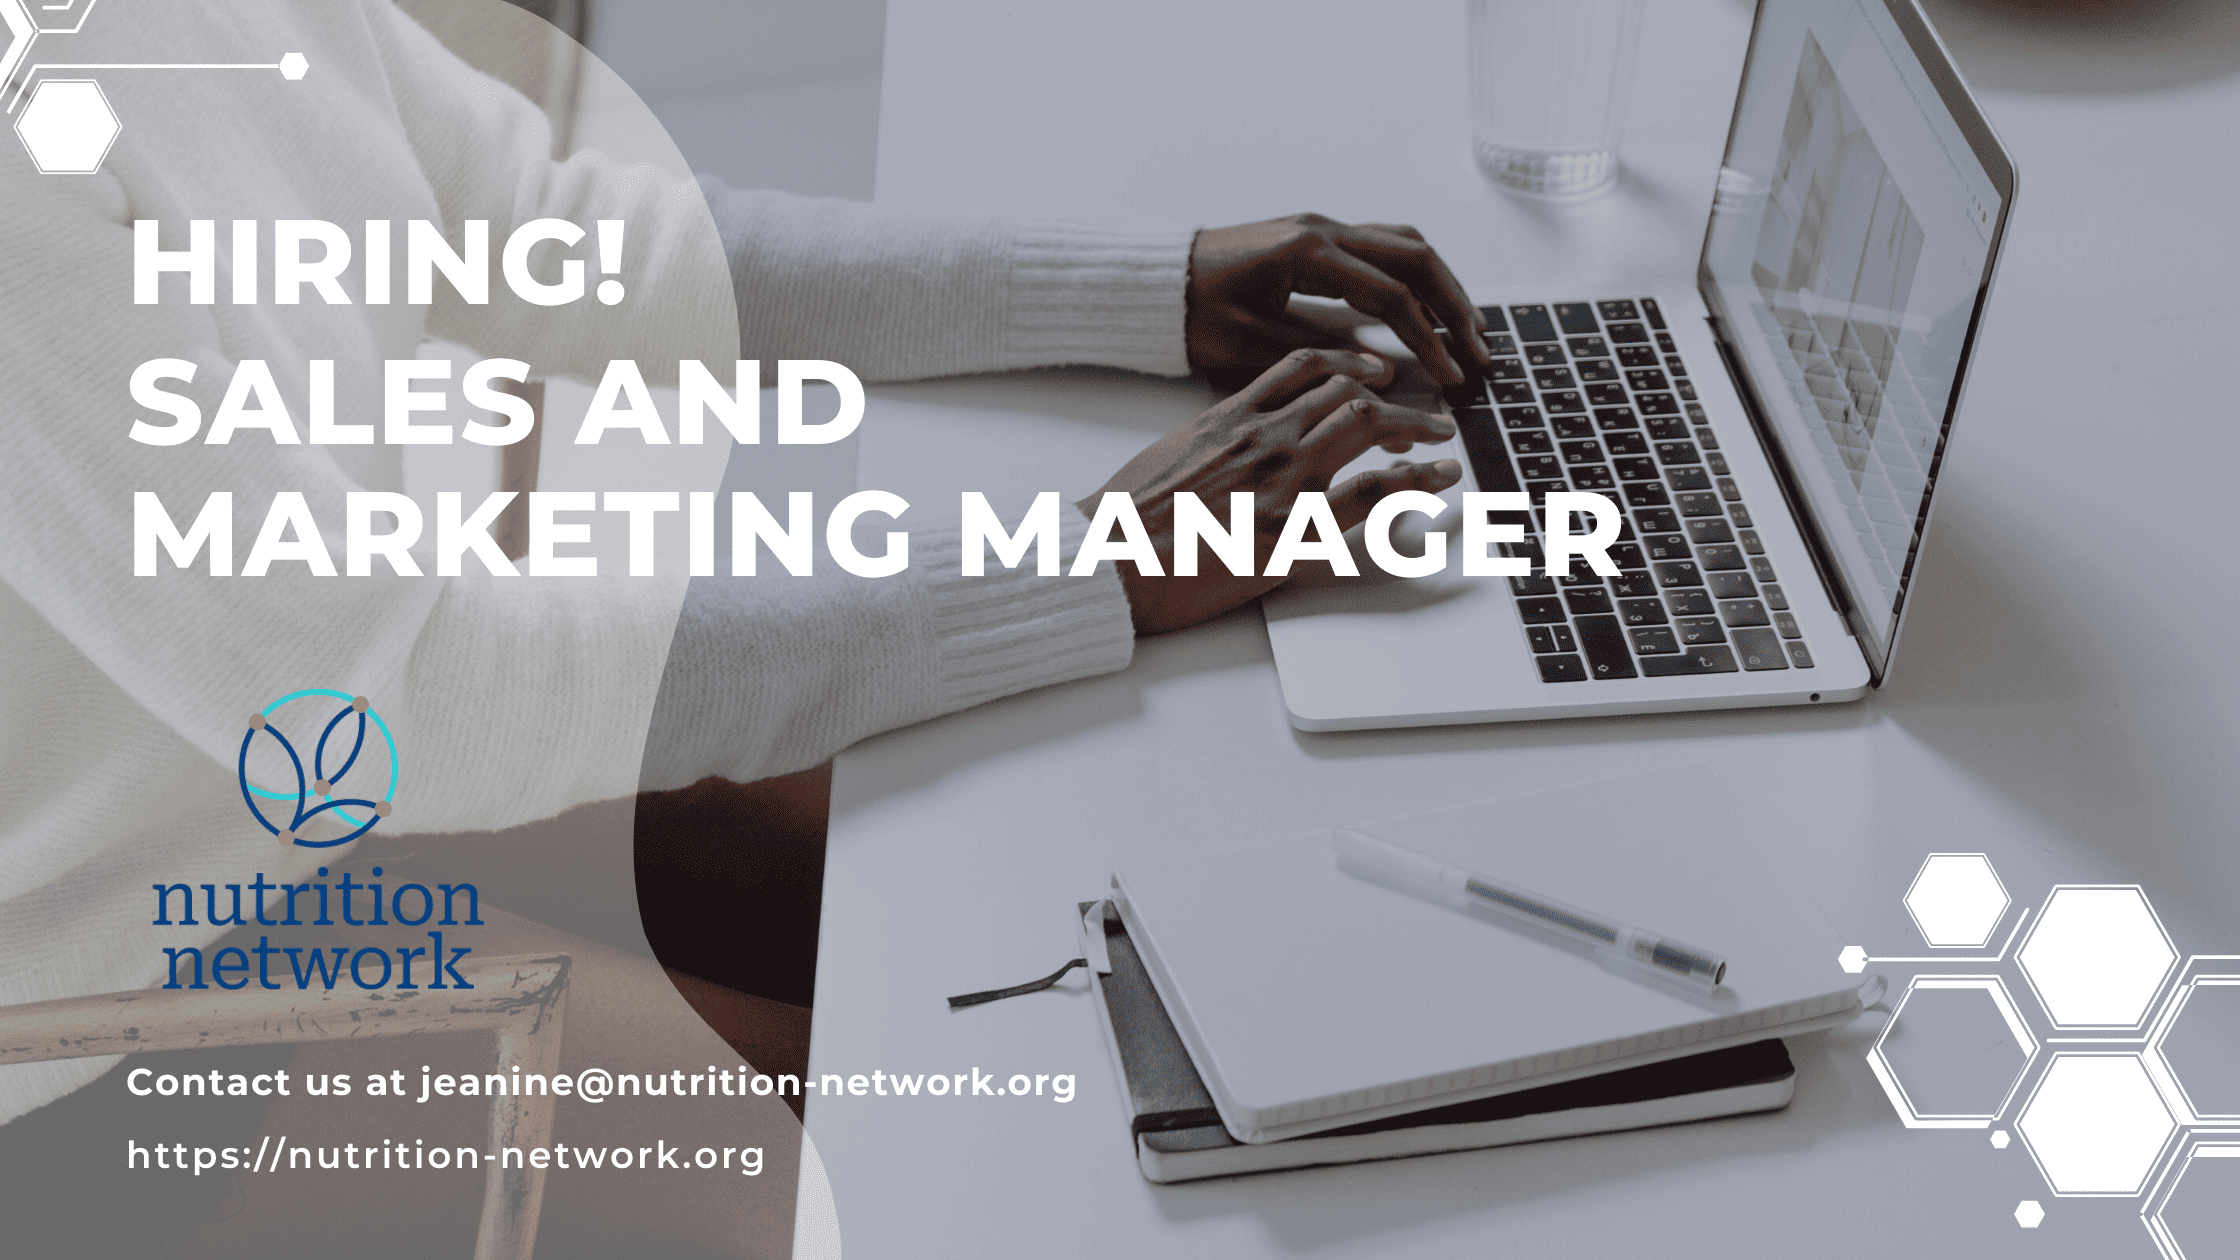 Hiring a Sales and Marketing Manager